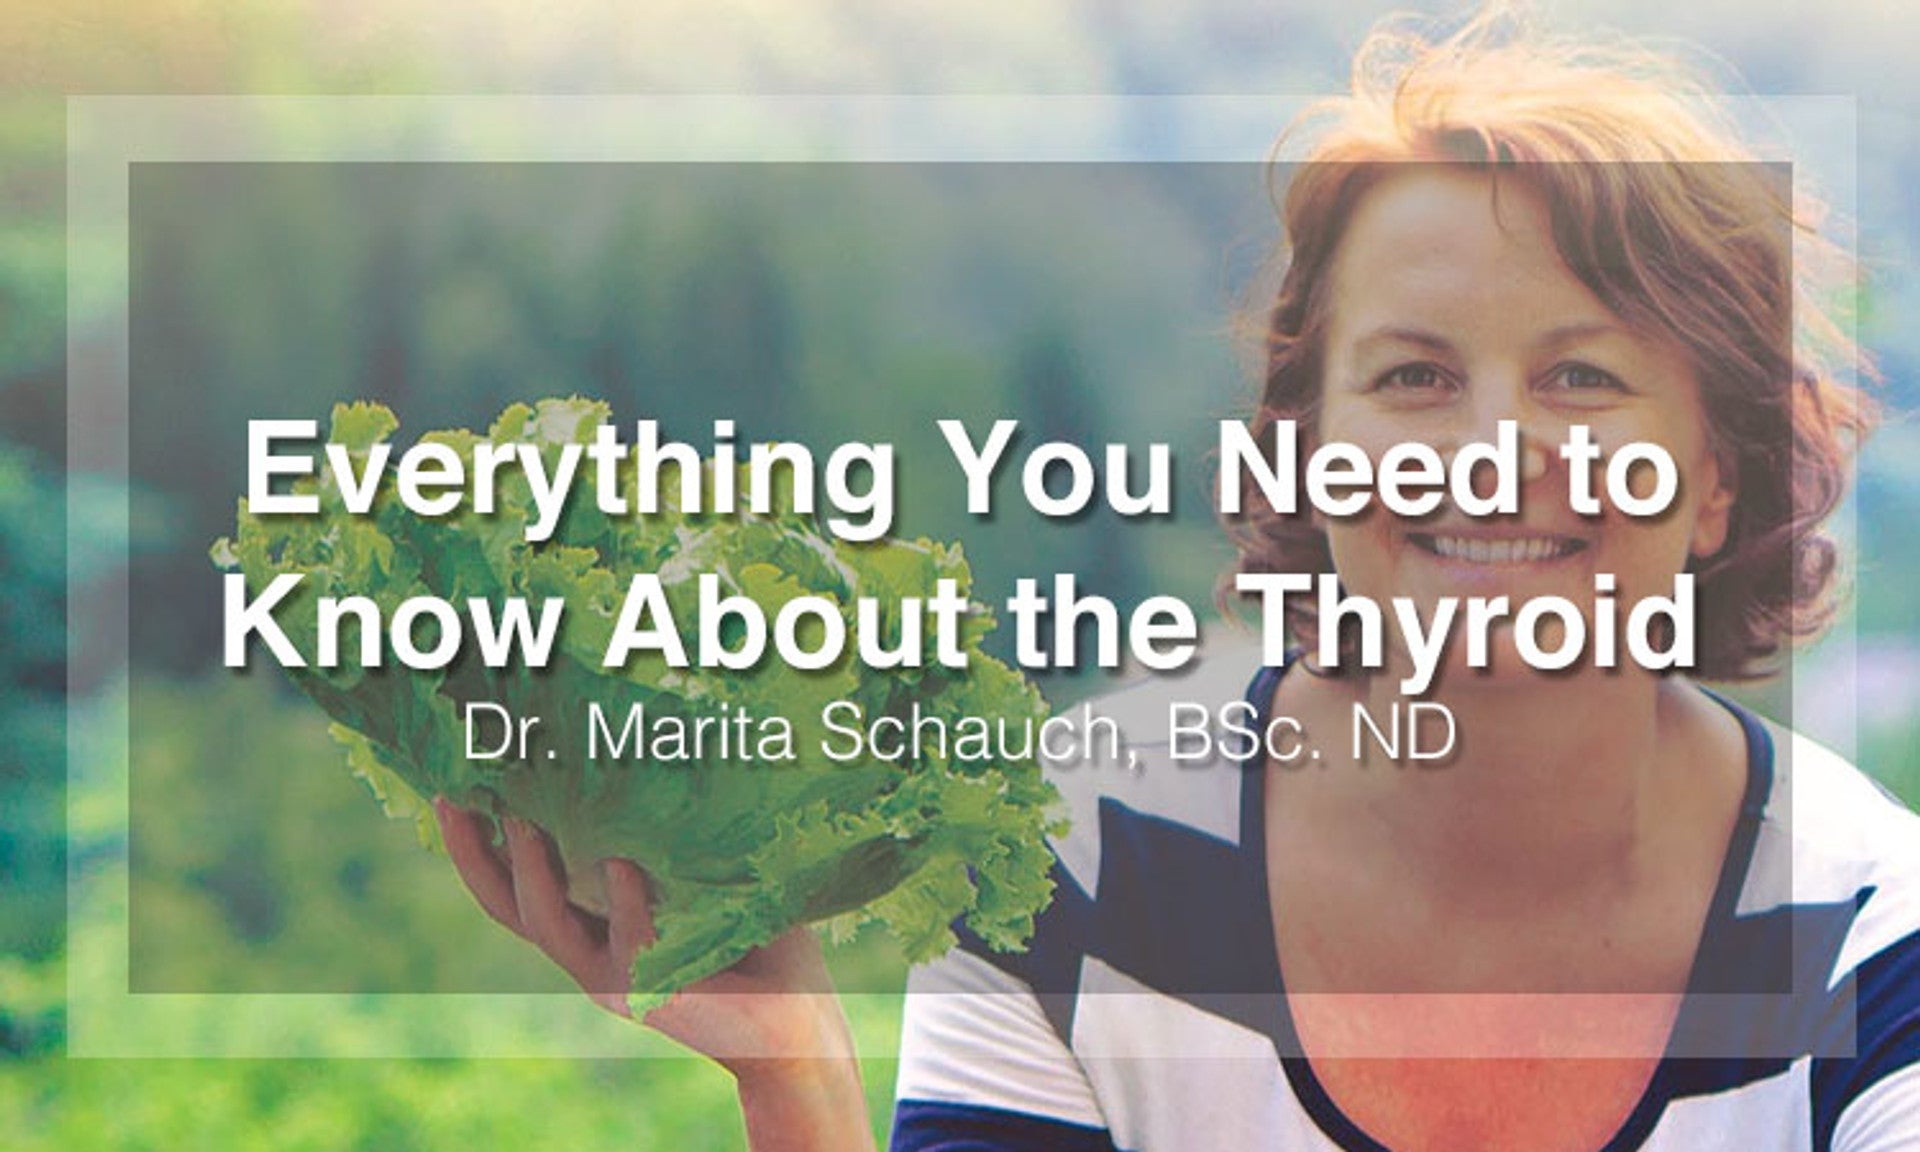 Everything You Need to Know About the Thyroid